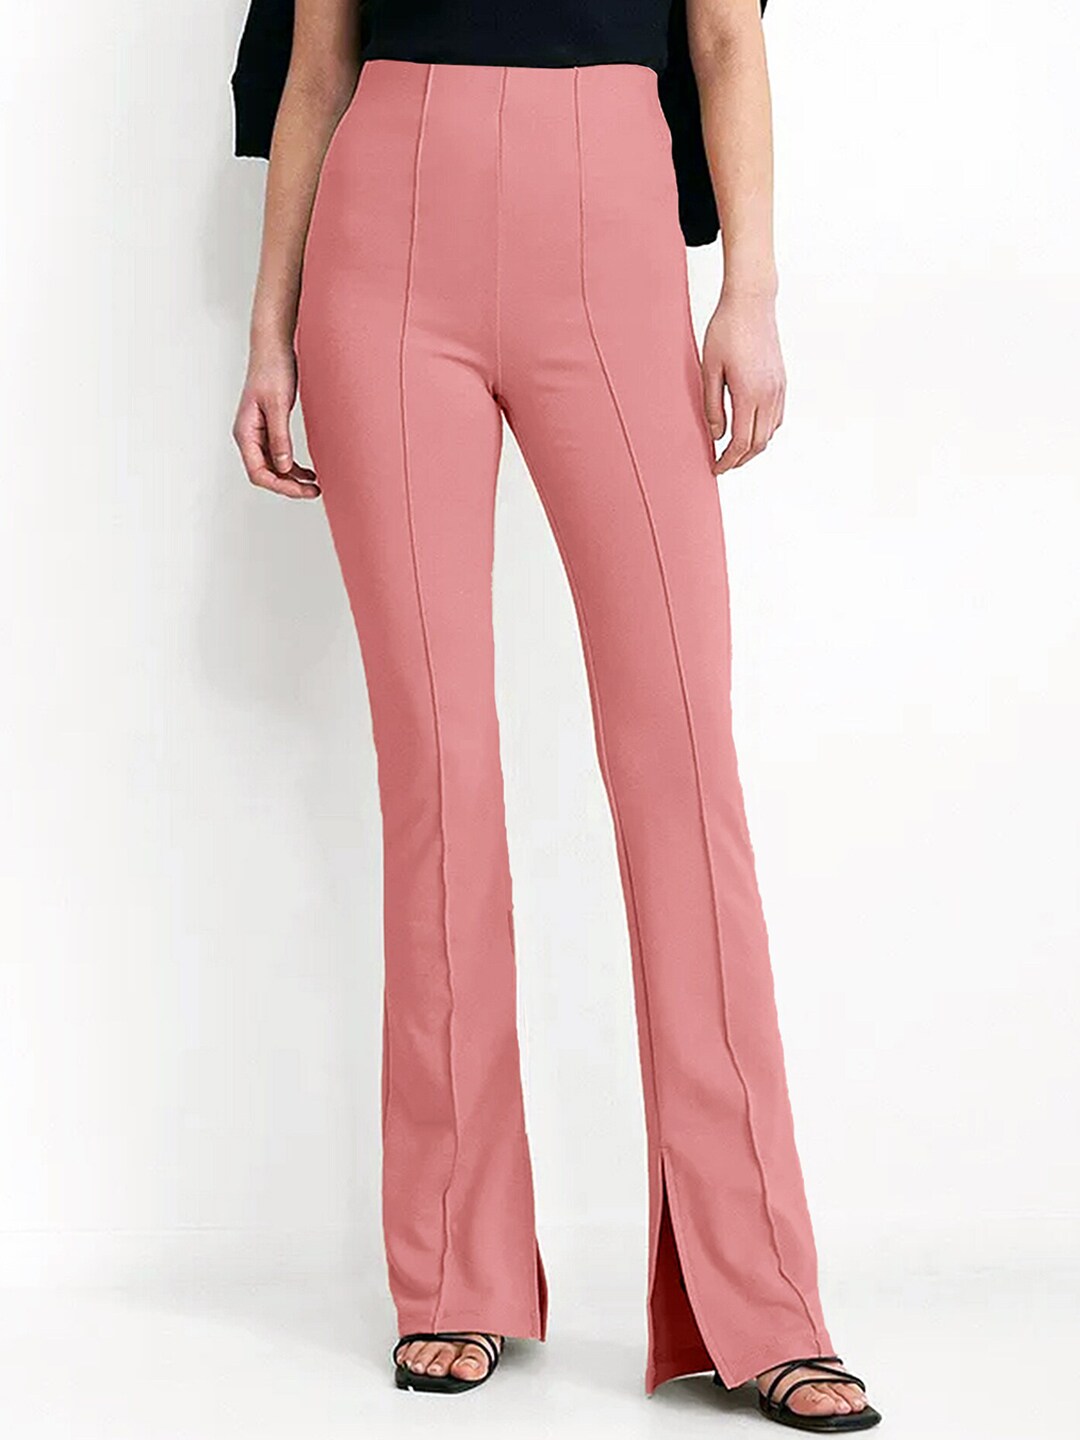 ADDYVERO Women Peach-Coloured Relaxed High-Rise Regular Fit Trousers Price in India